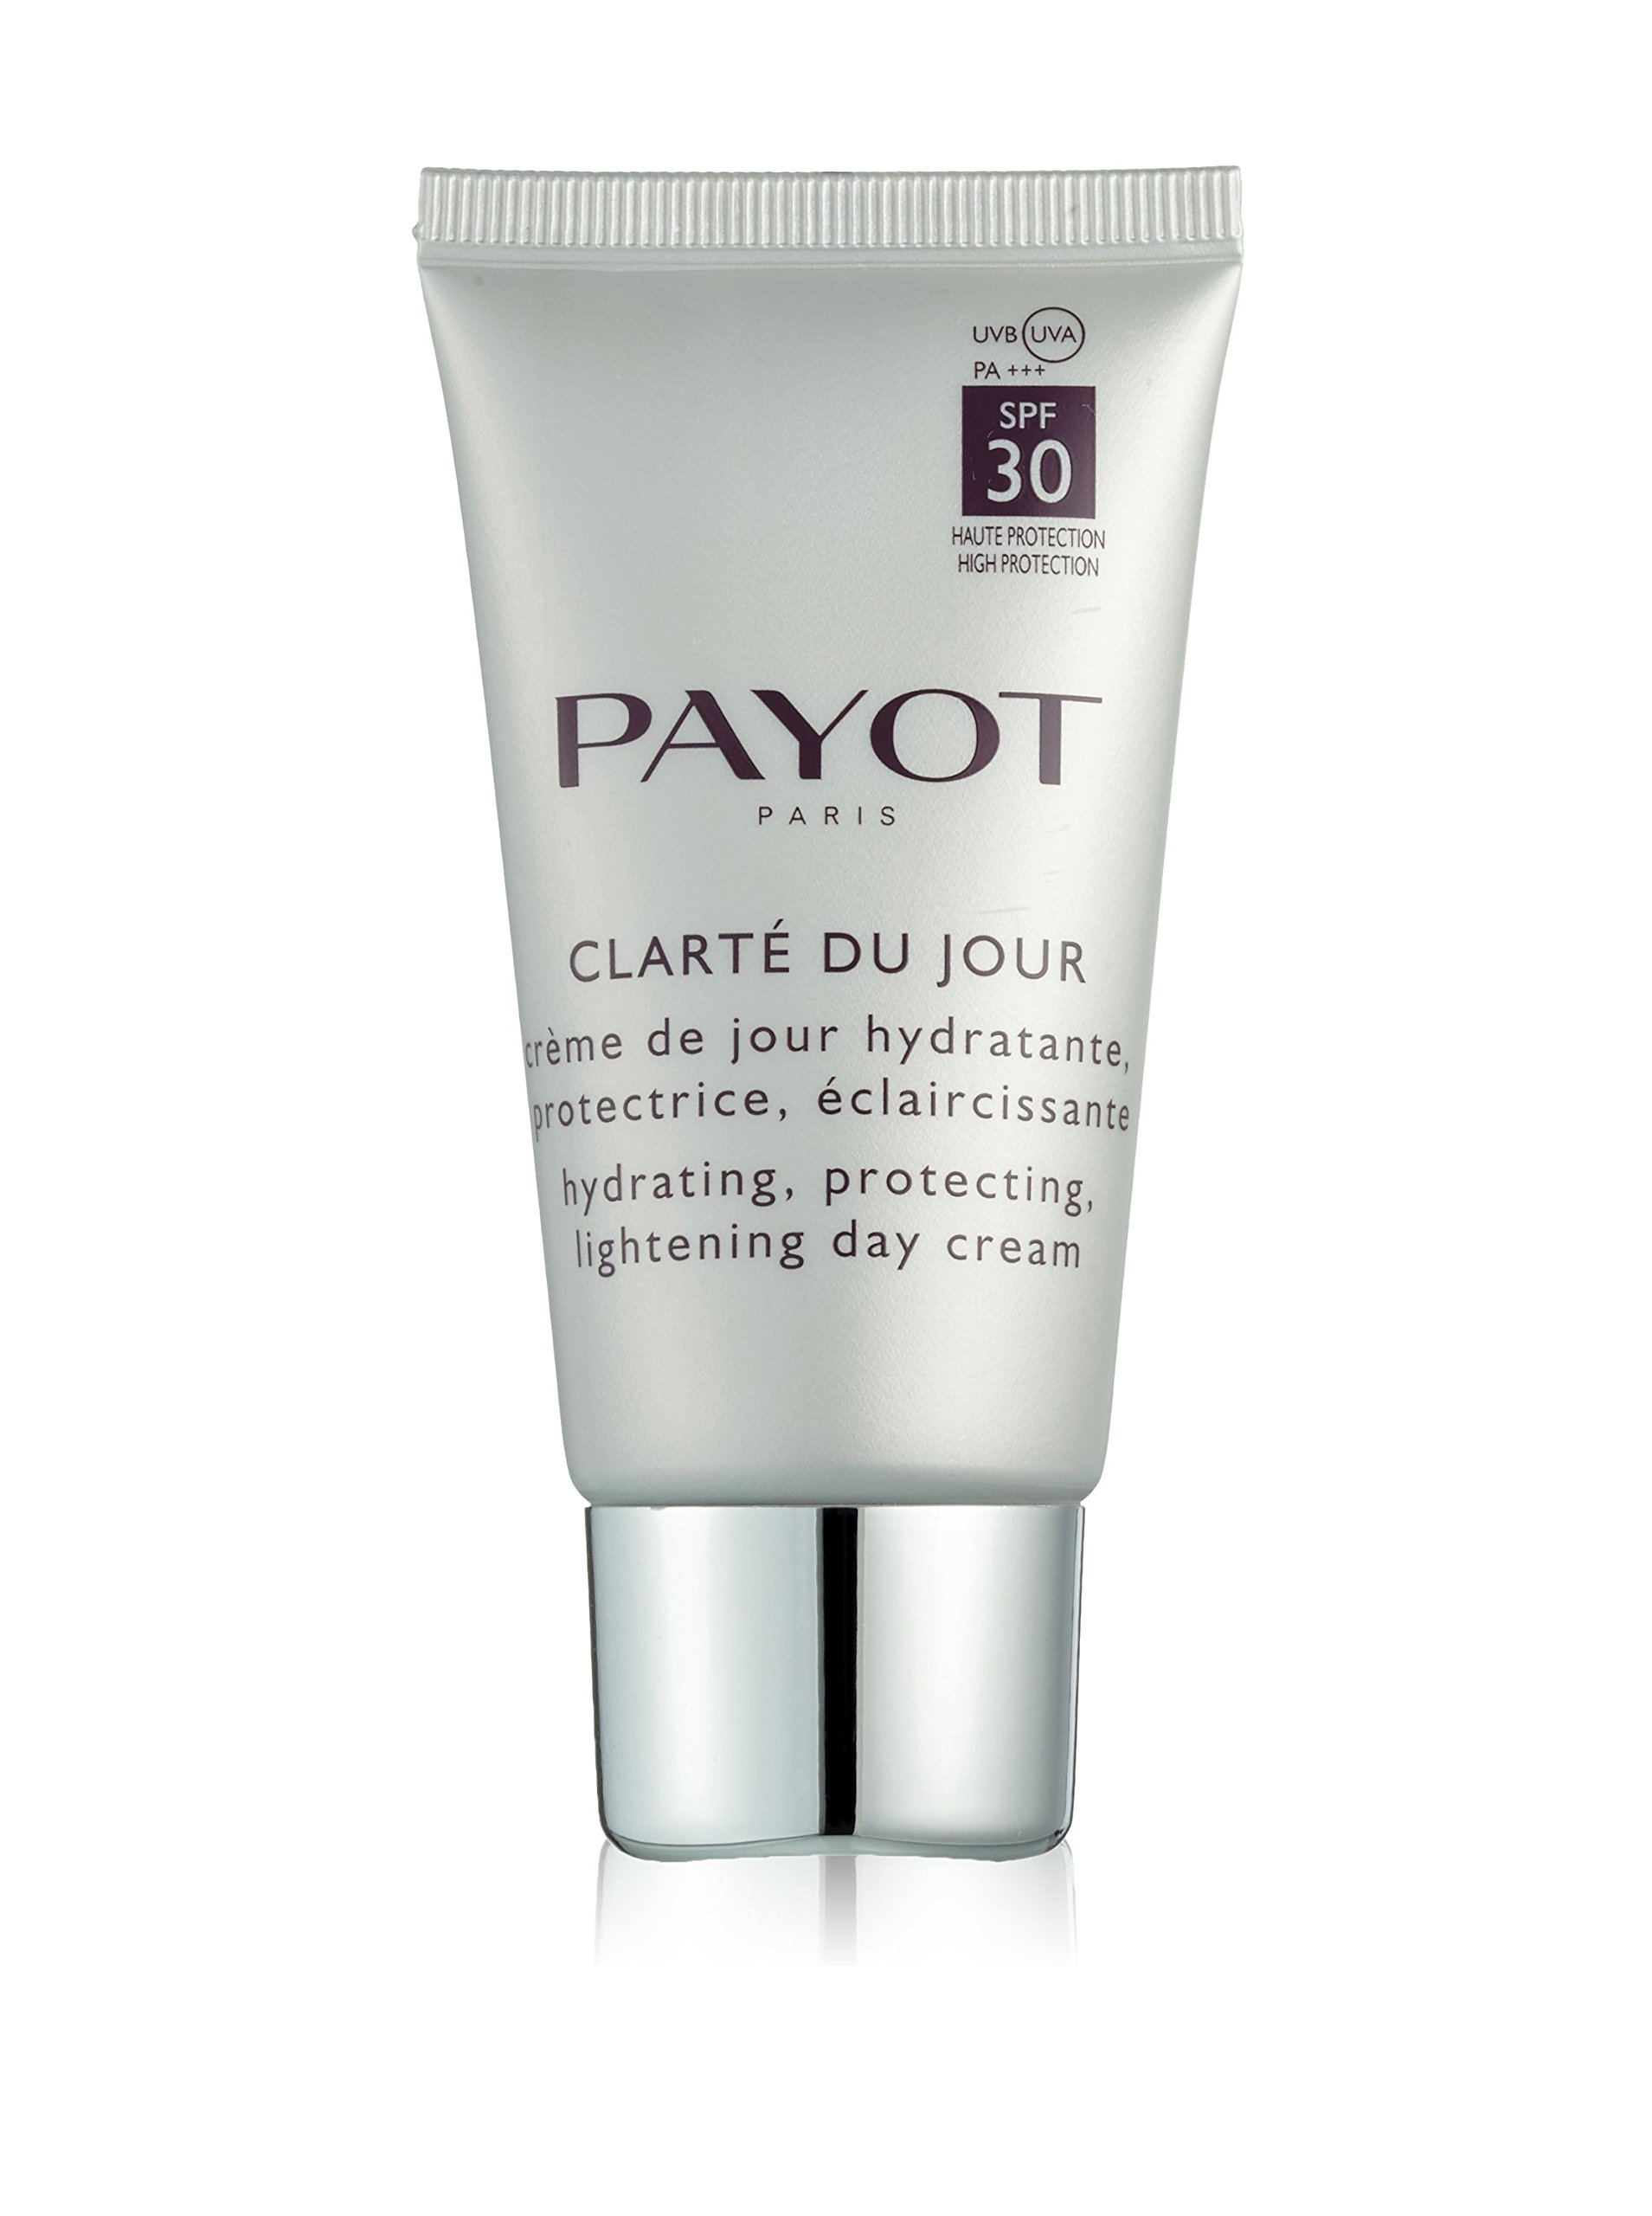 Payot, Absolute Pure white Hydrating Protecting Lightening Day Cream 50 ml, scharf, 1 stück